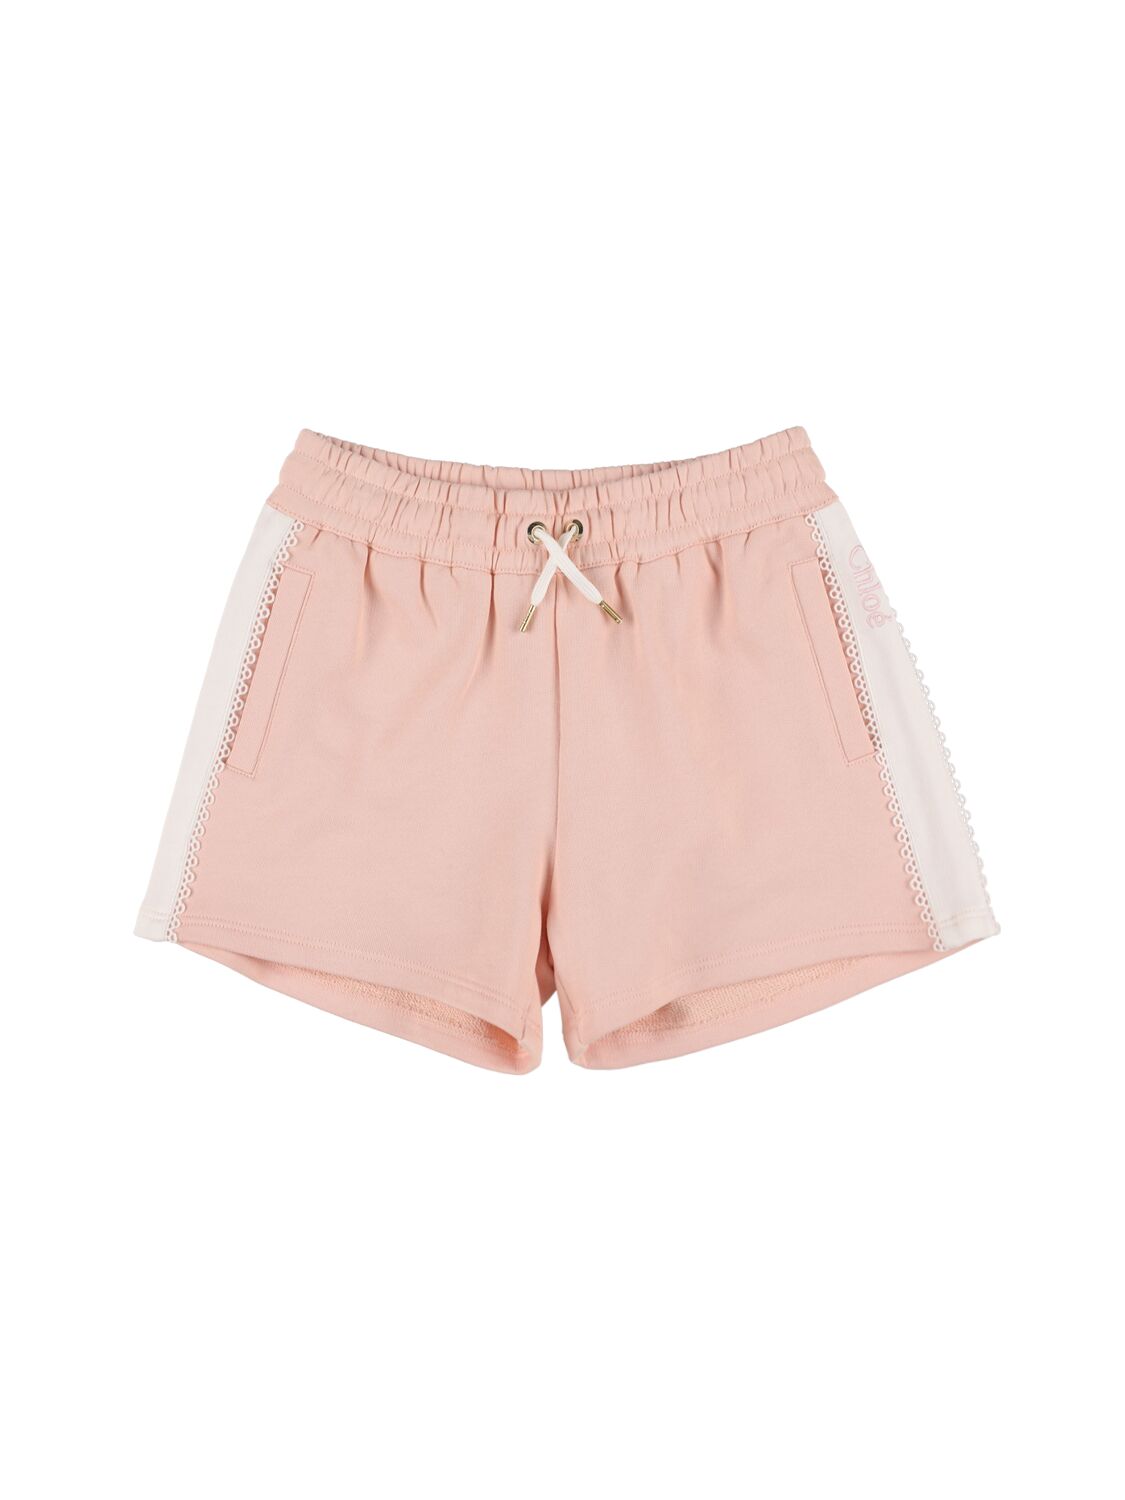 Chloé Kids' Organic Cotton Jersey Shorts W/ Bands In Pink